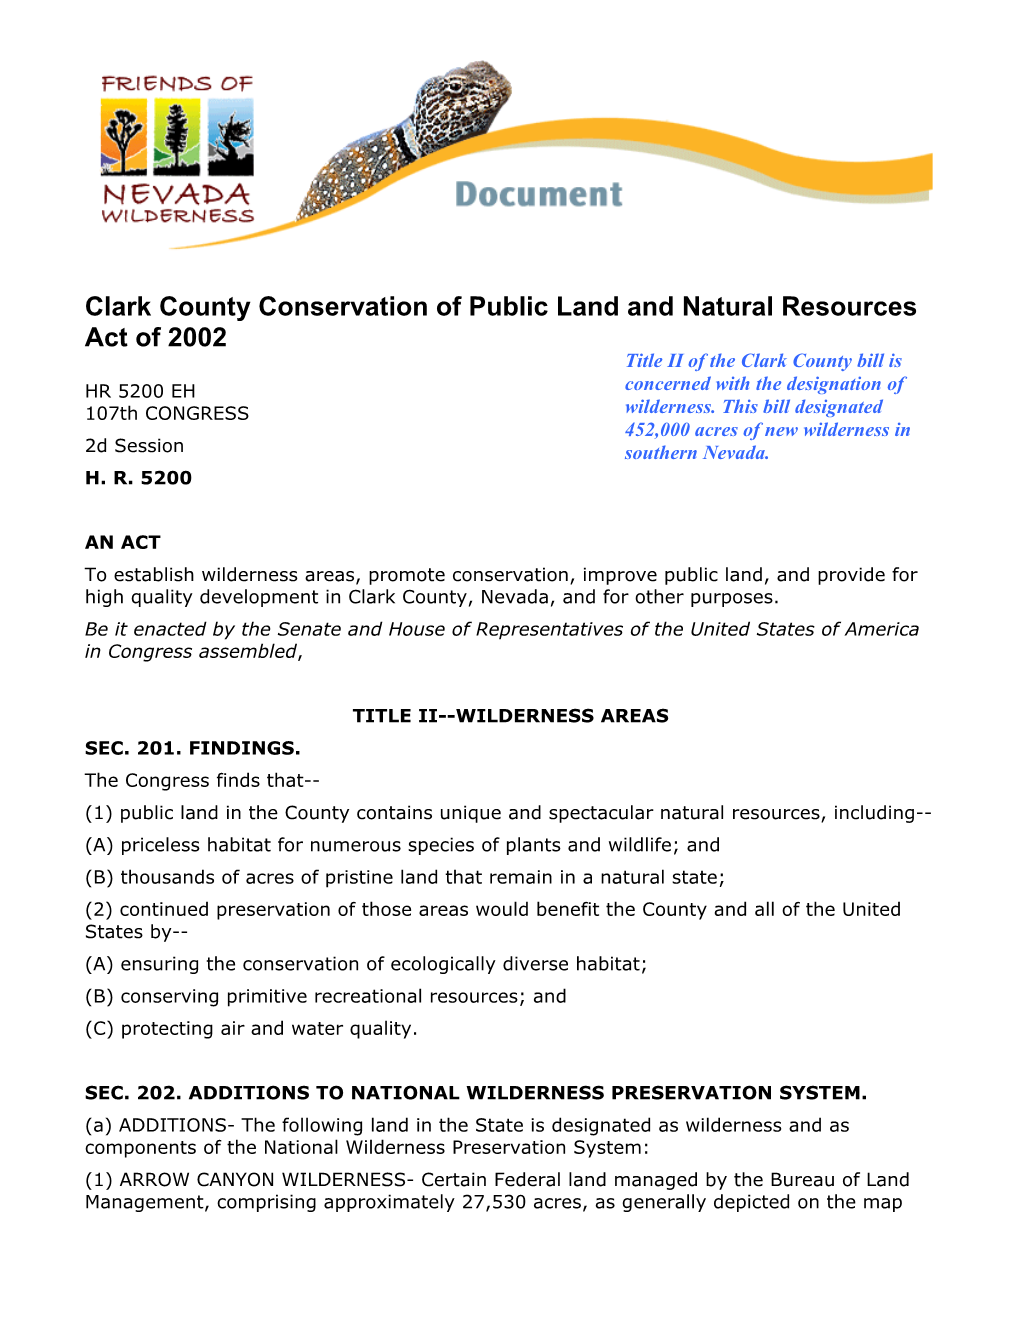 Clark County Conservation of Public Land and Natural Resources Act Of